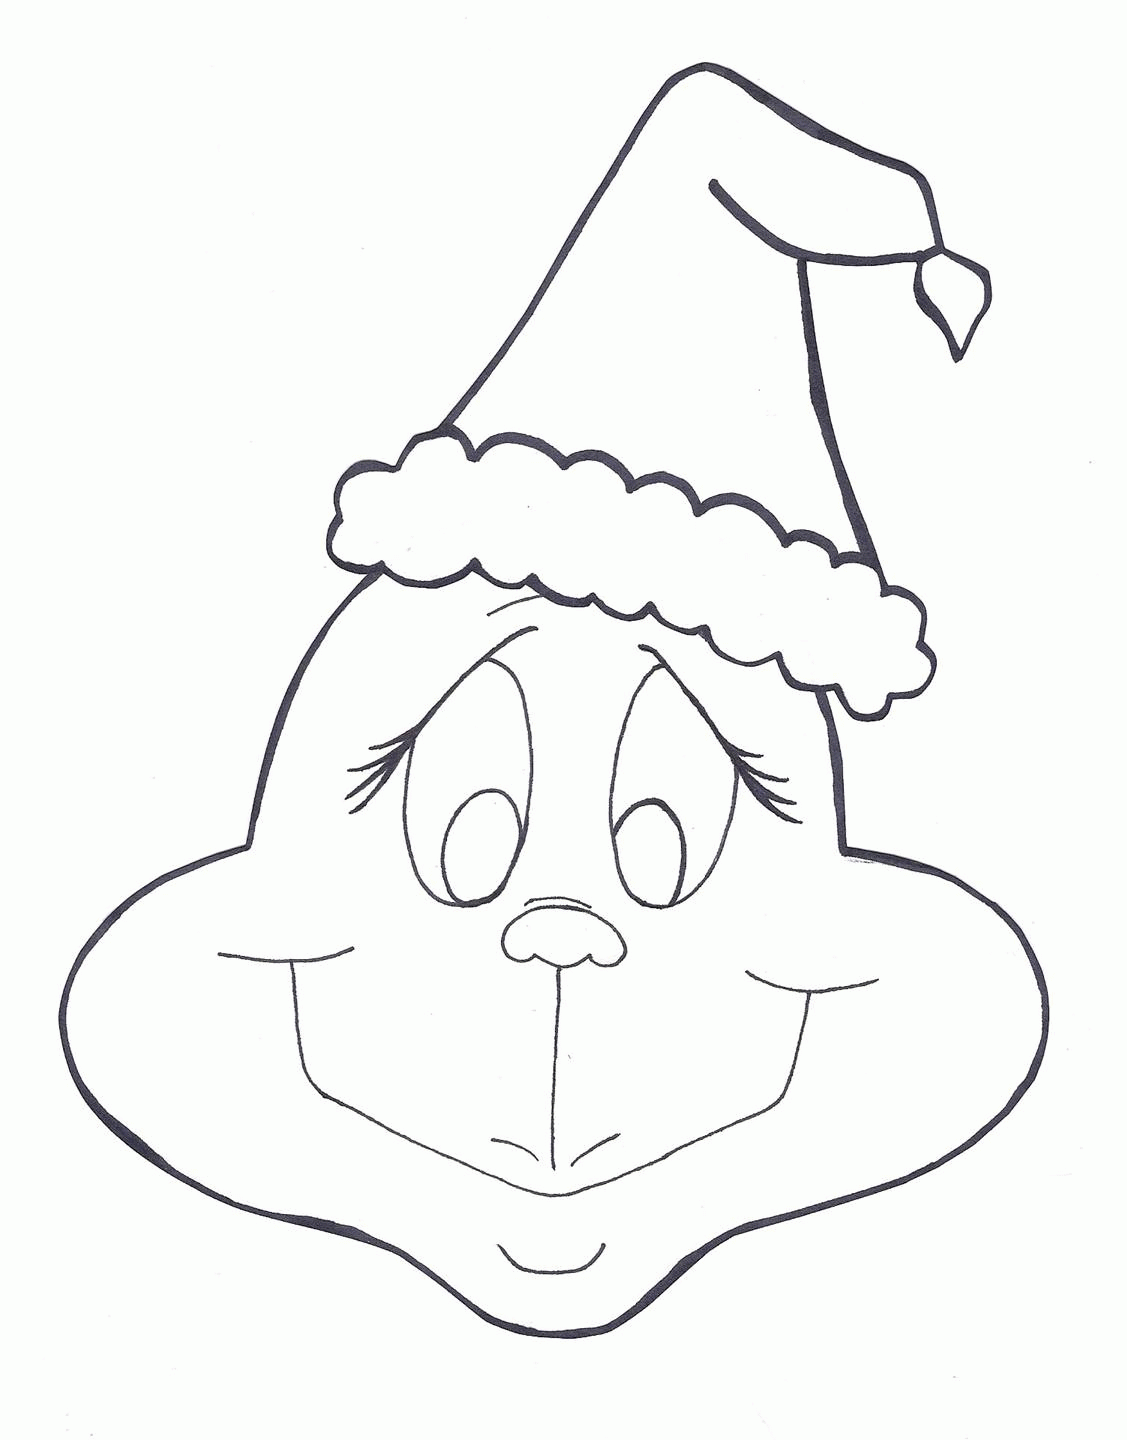 Related Grinch Coloring Pages, Grinch Coloring Pages